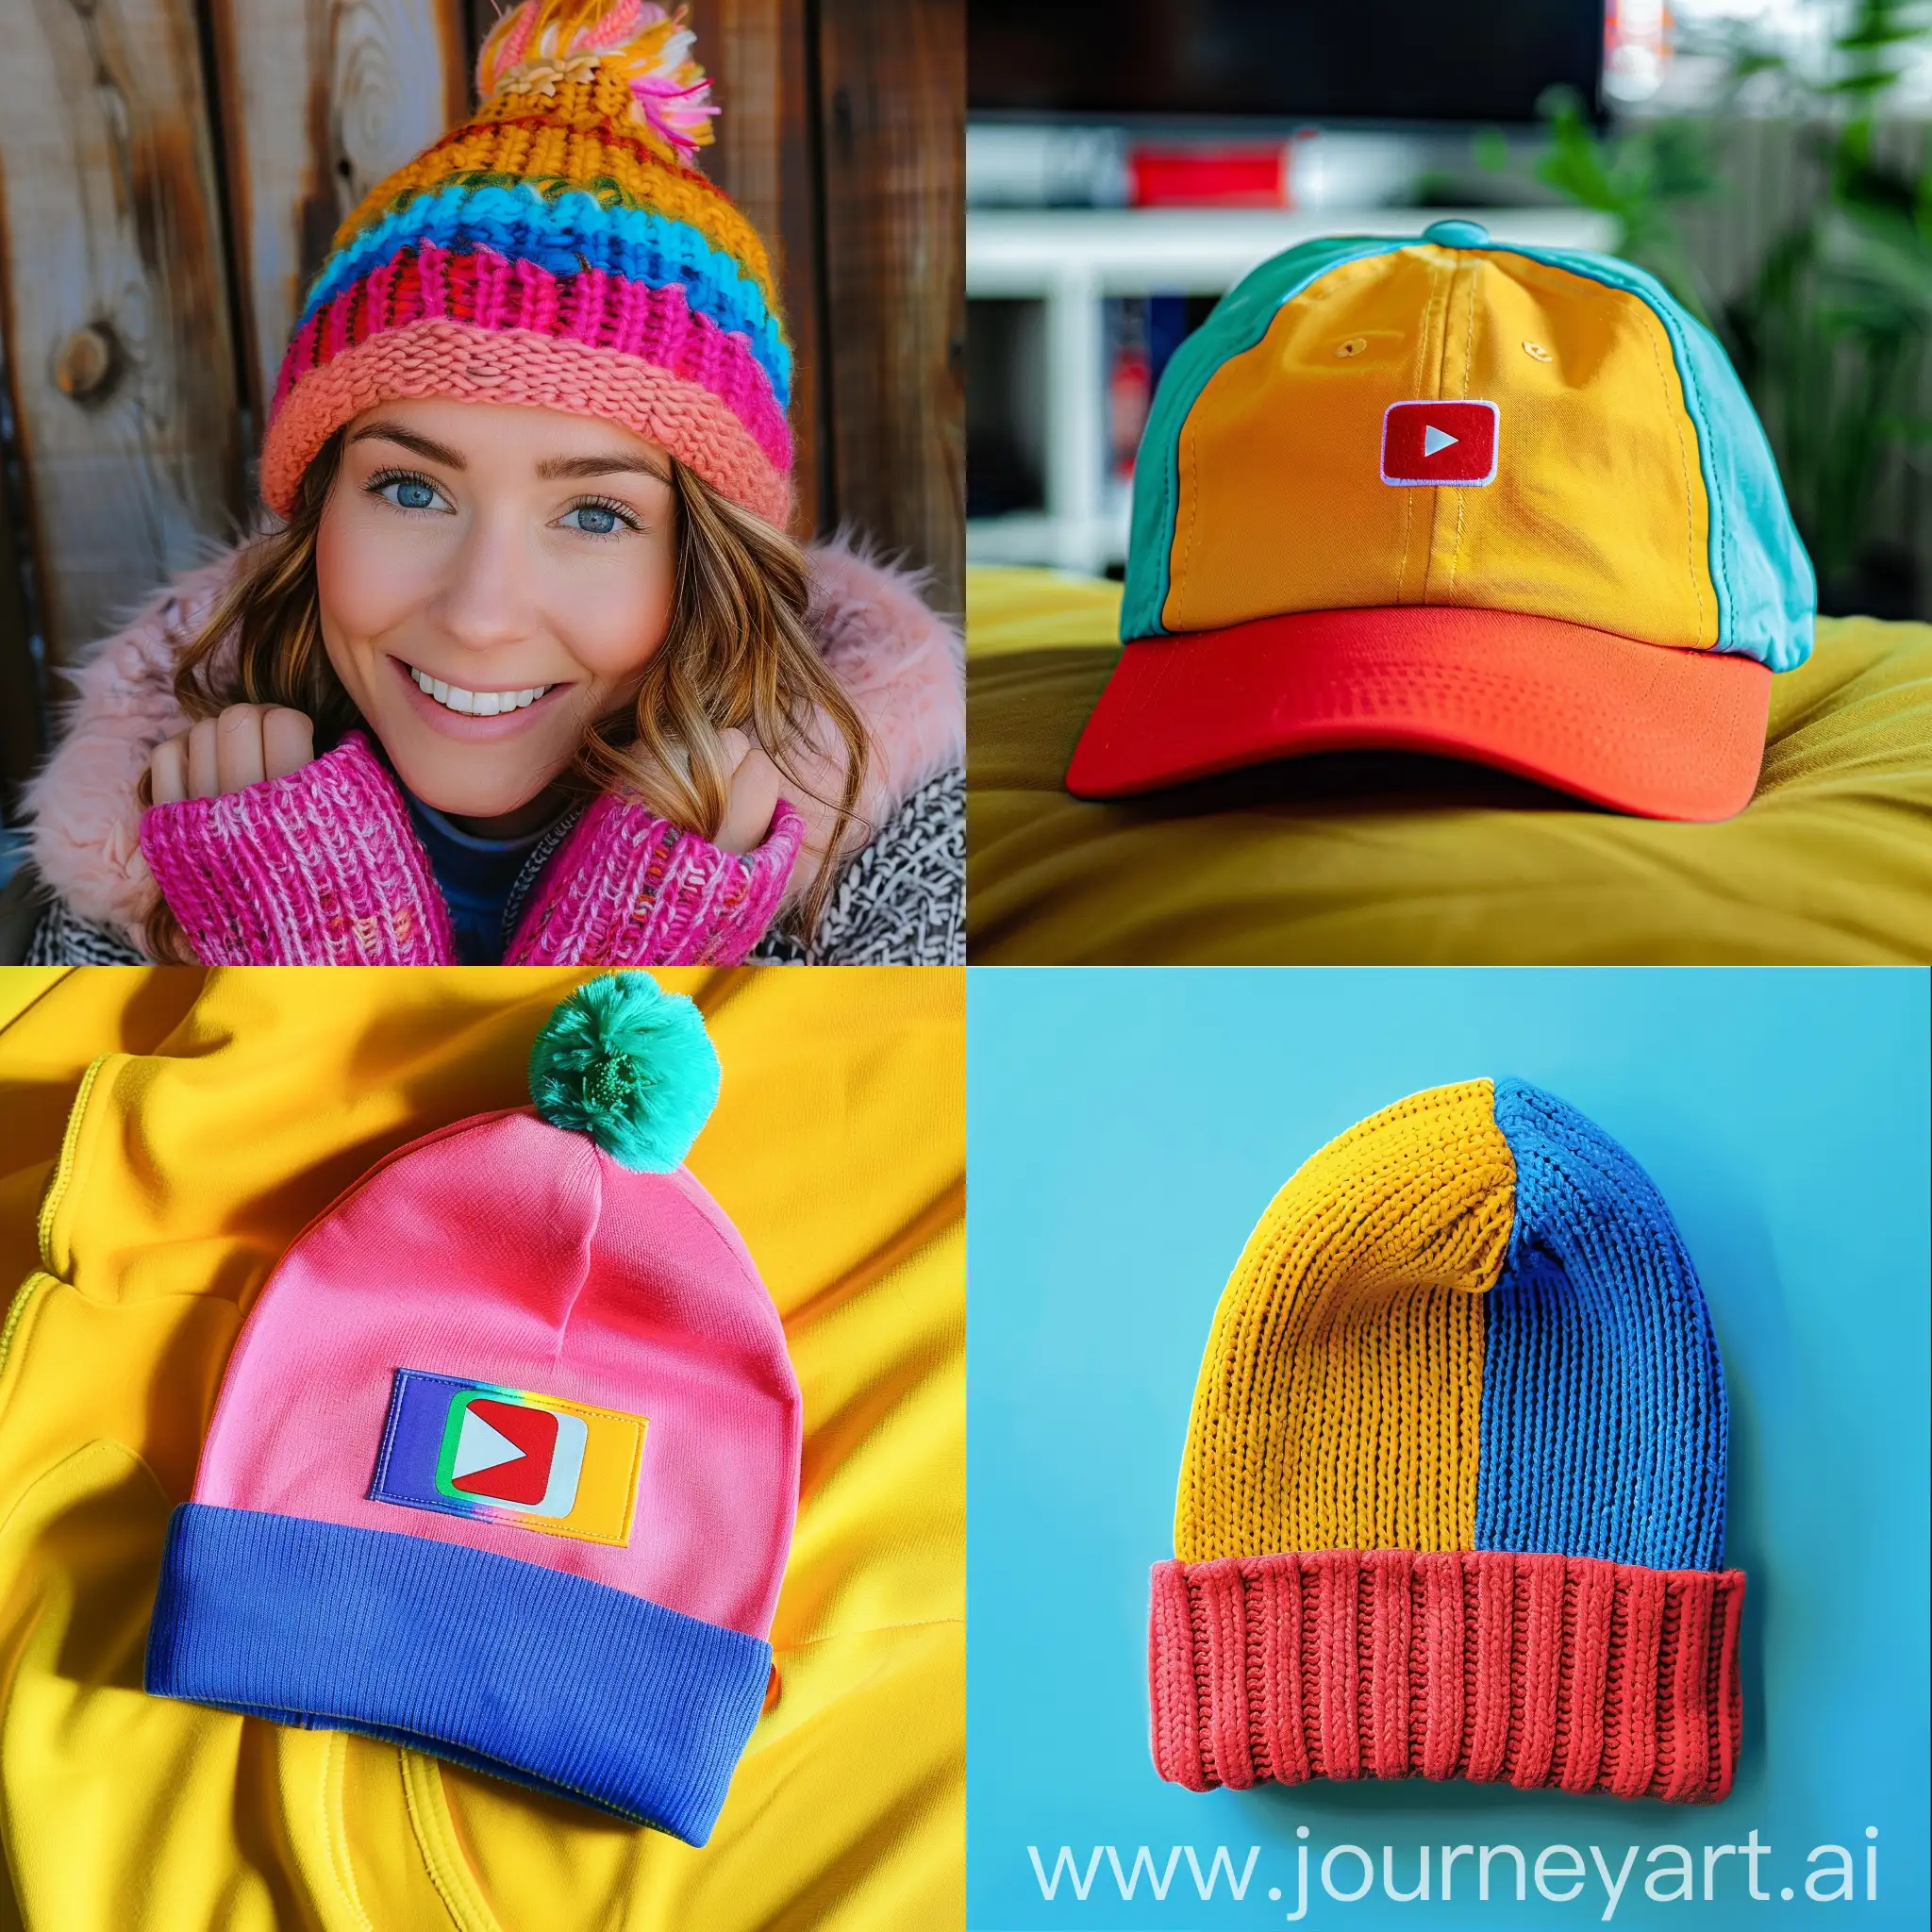 Make a hat for a YouTube channel without labels in bright colors